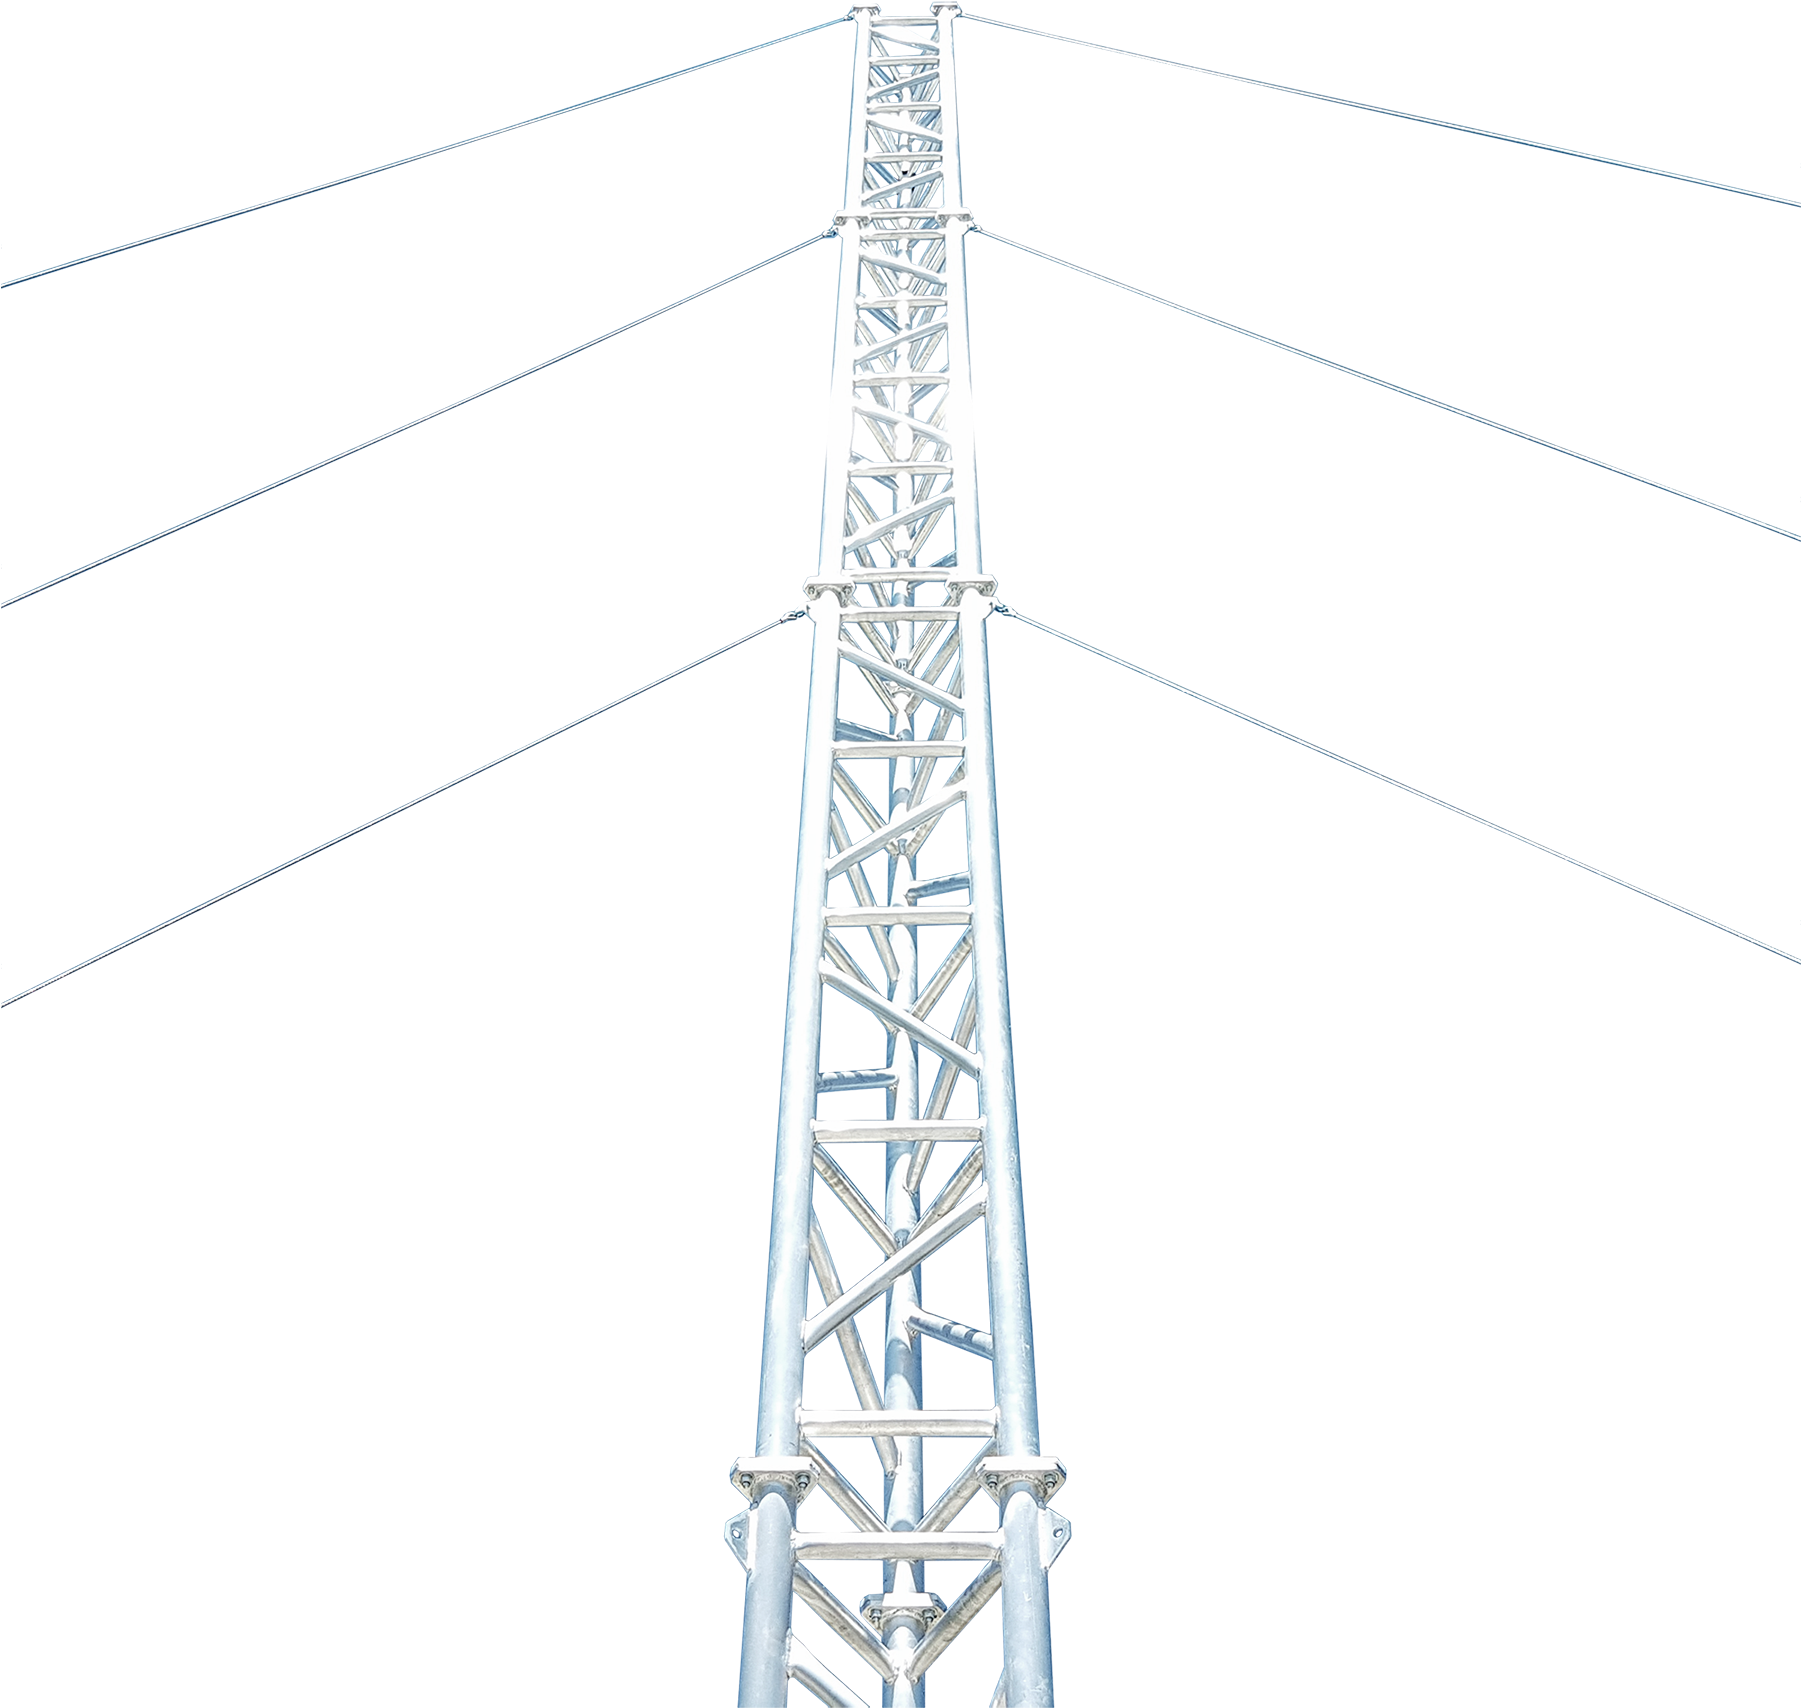 Al500 Aluminium Guyed Lattice Tower - Transmission Tower, Hd Png Download